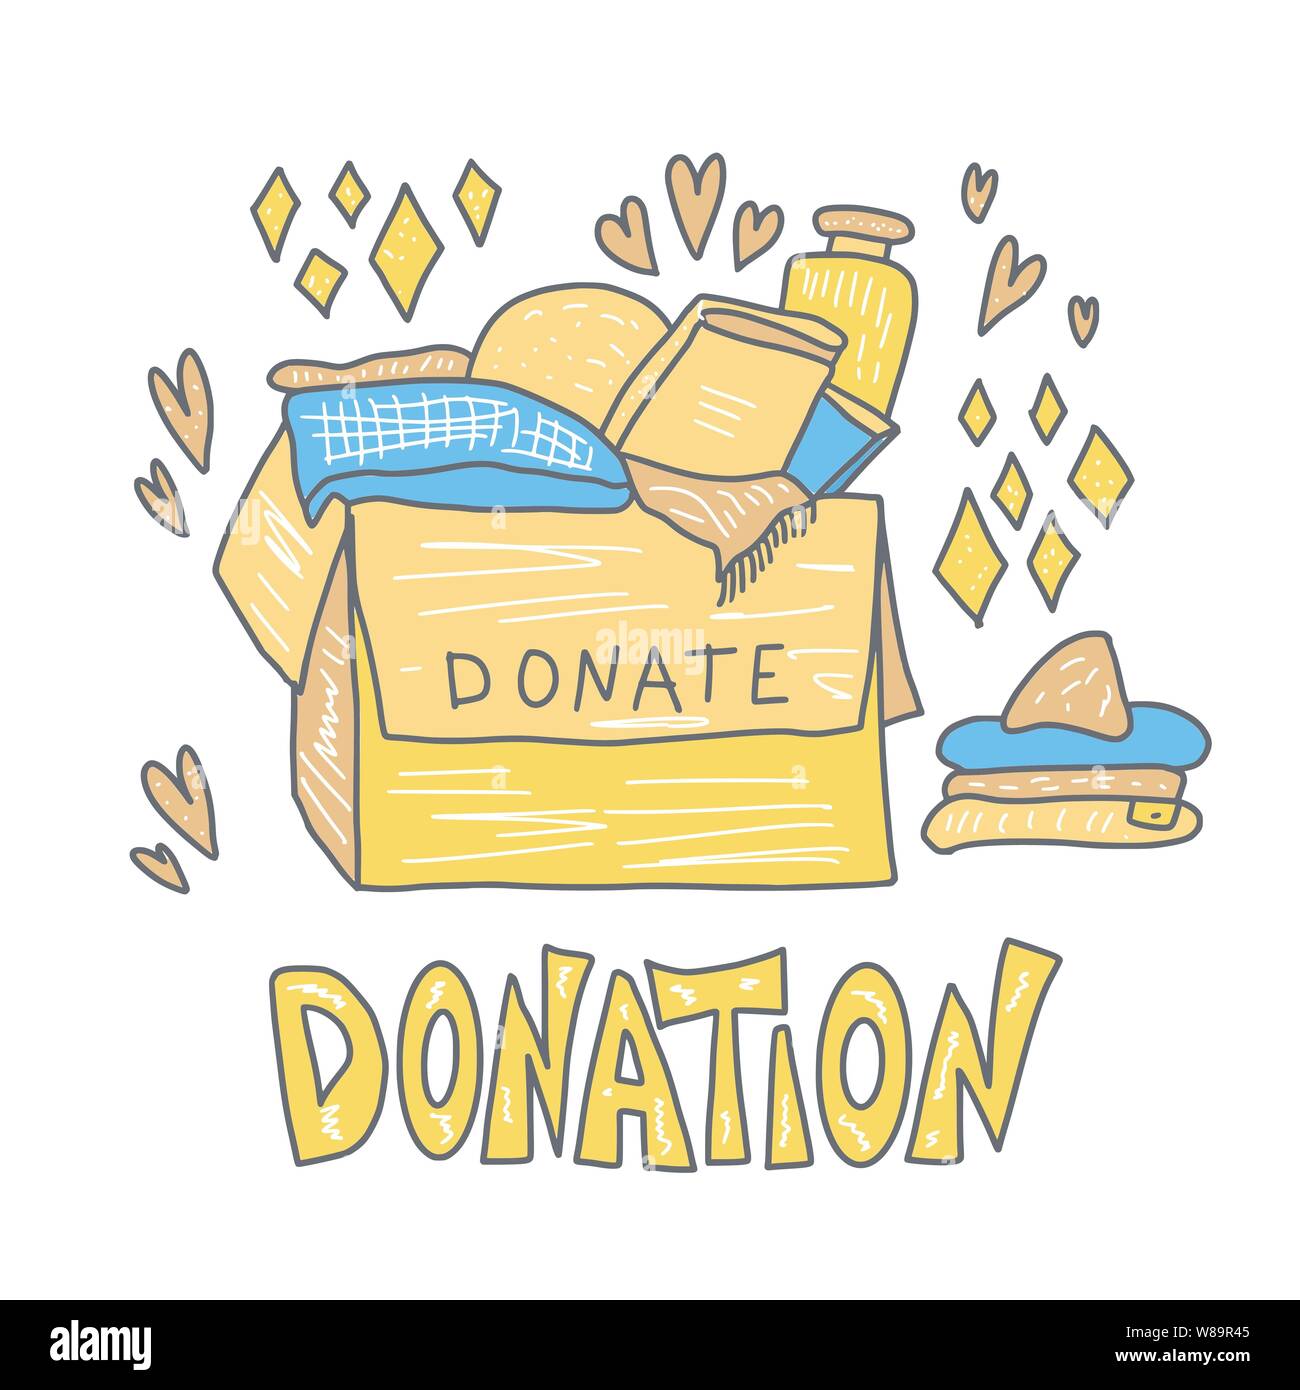 Donation concept. Box with stuff and text. Donate things with lettering isolated on white background. Vector color illustration. Stock Vector